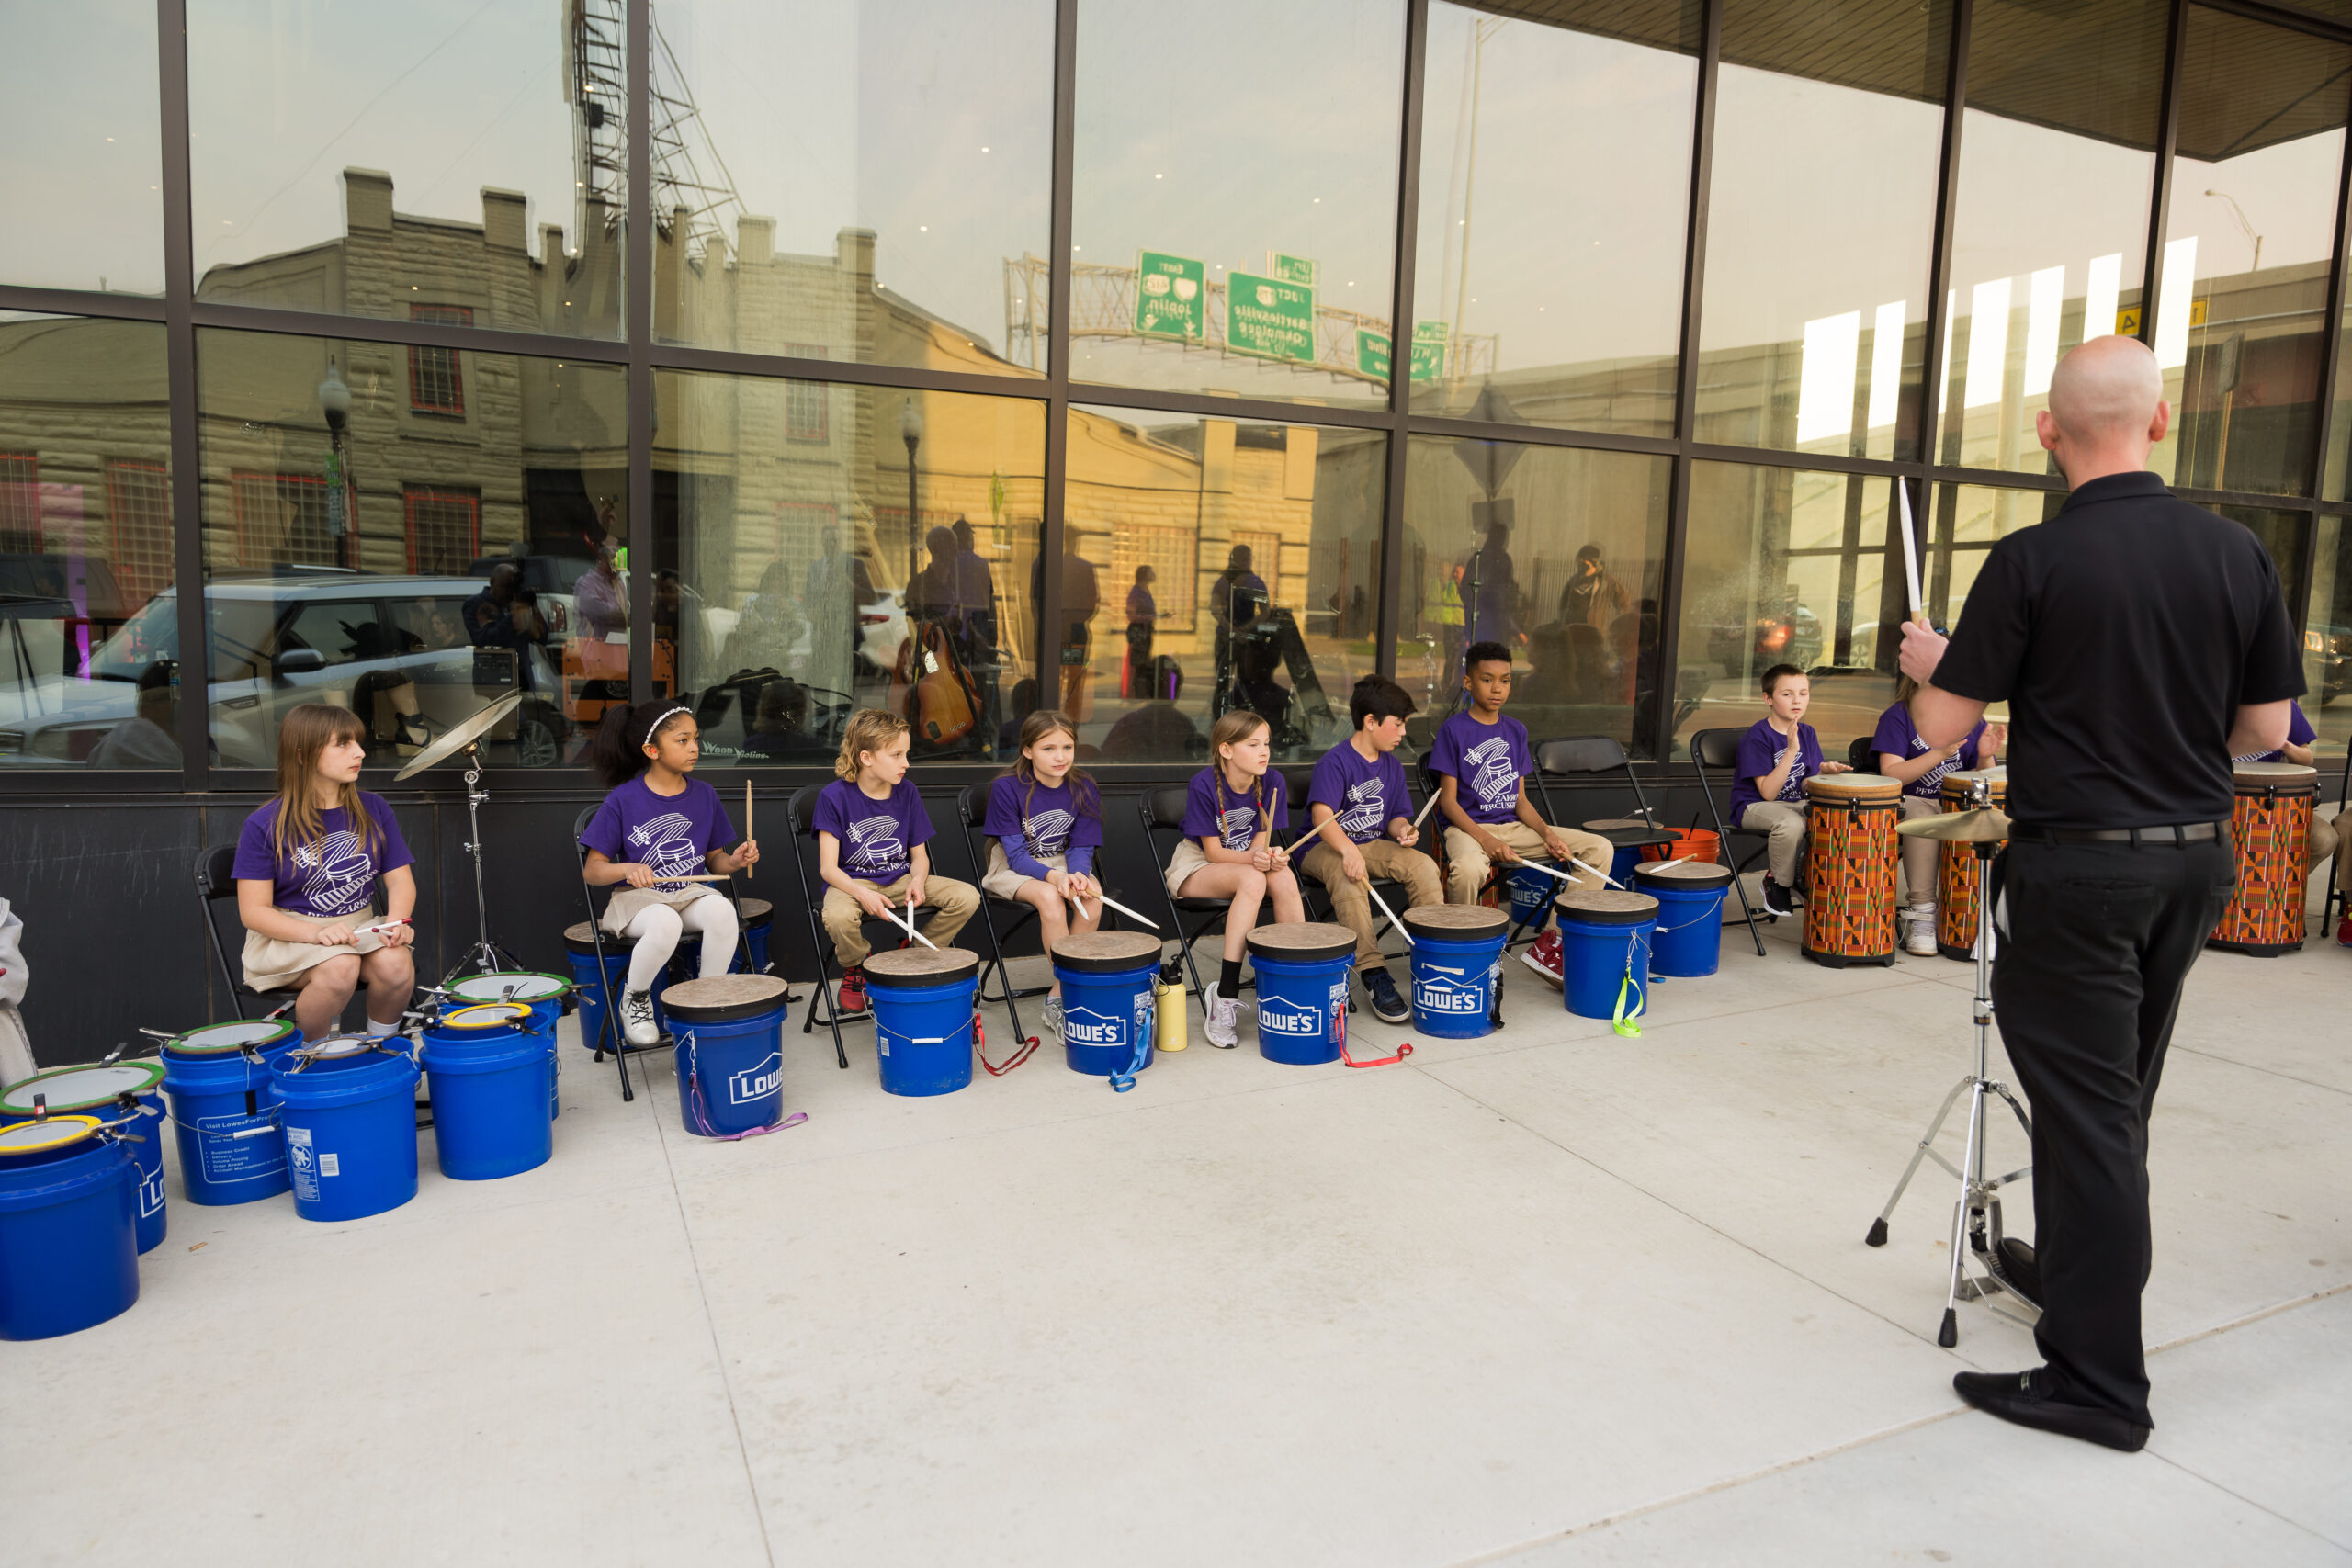 Tulsa Public School students demonstrate their musical talents at the ArtRagous Fundraiser